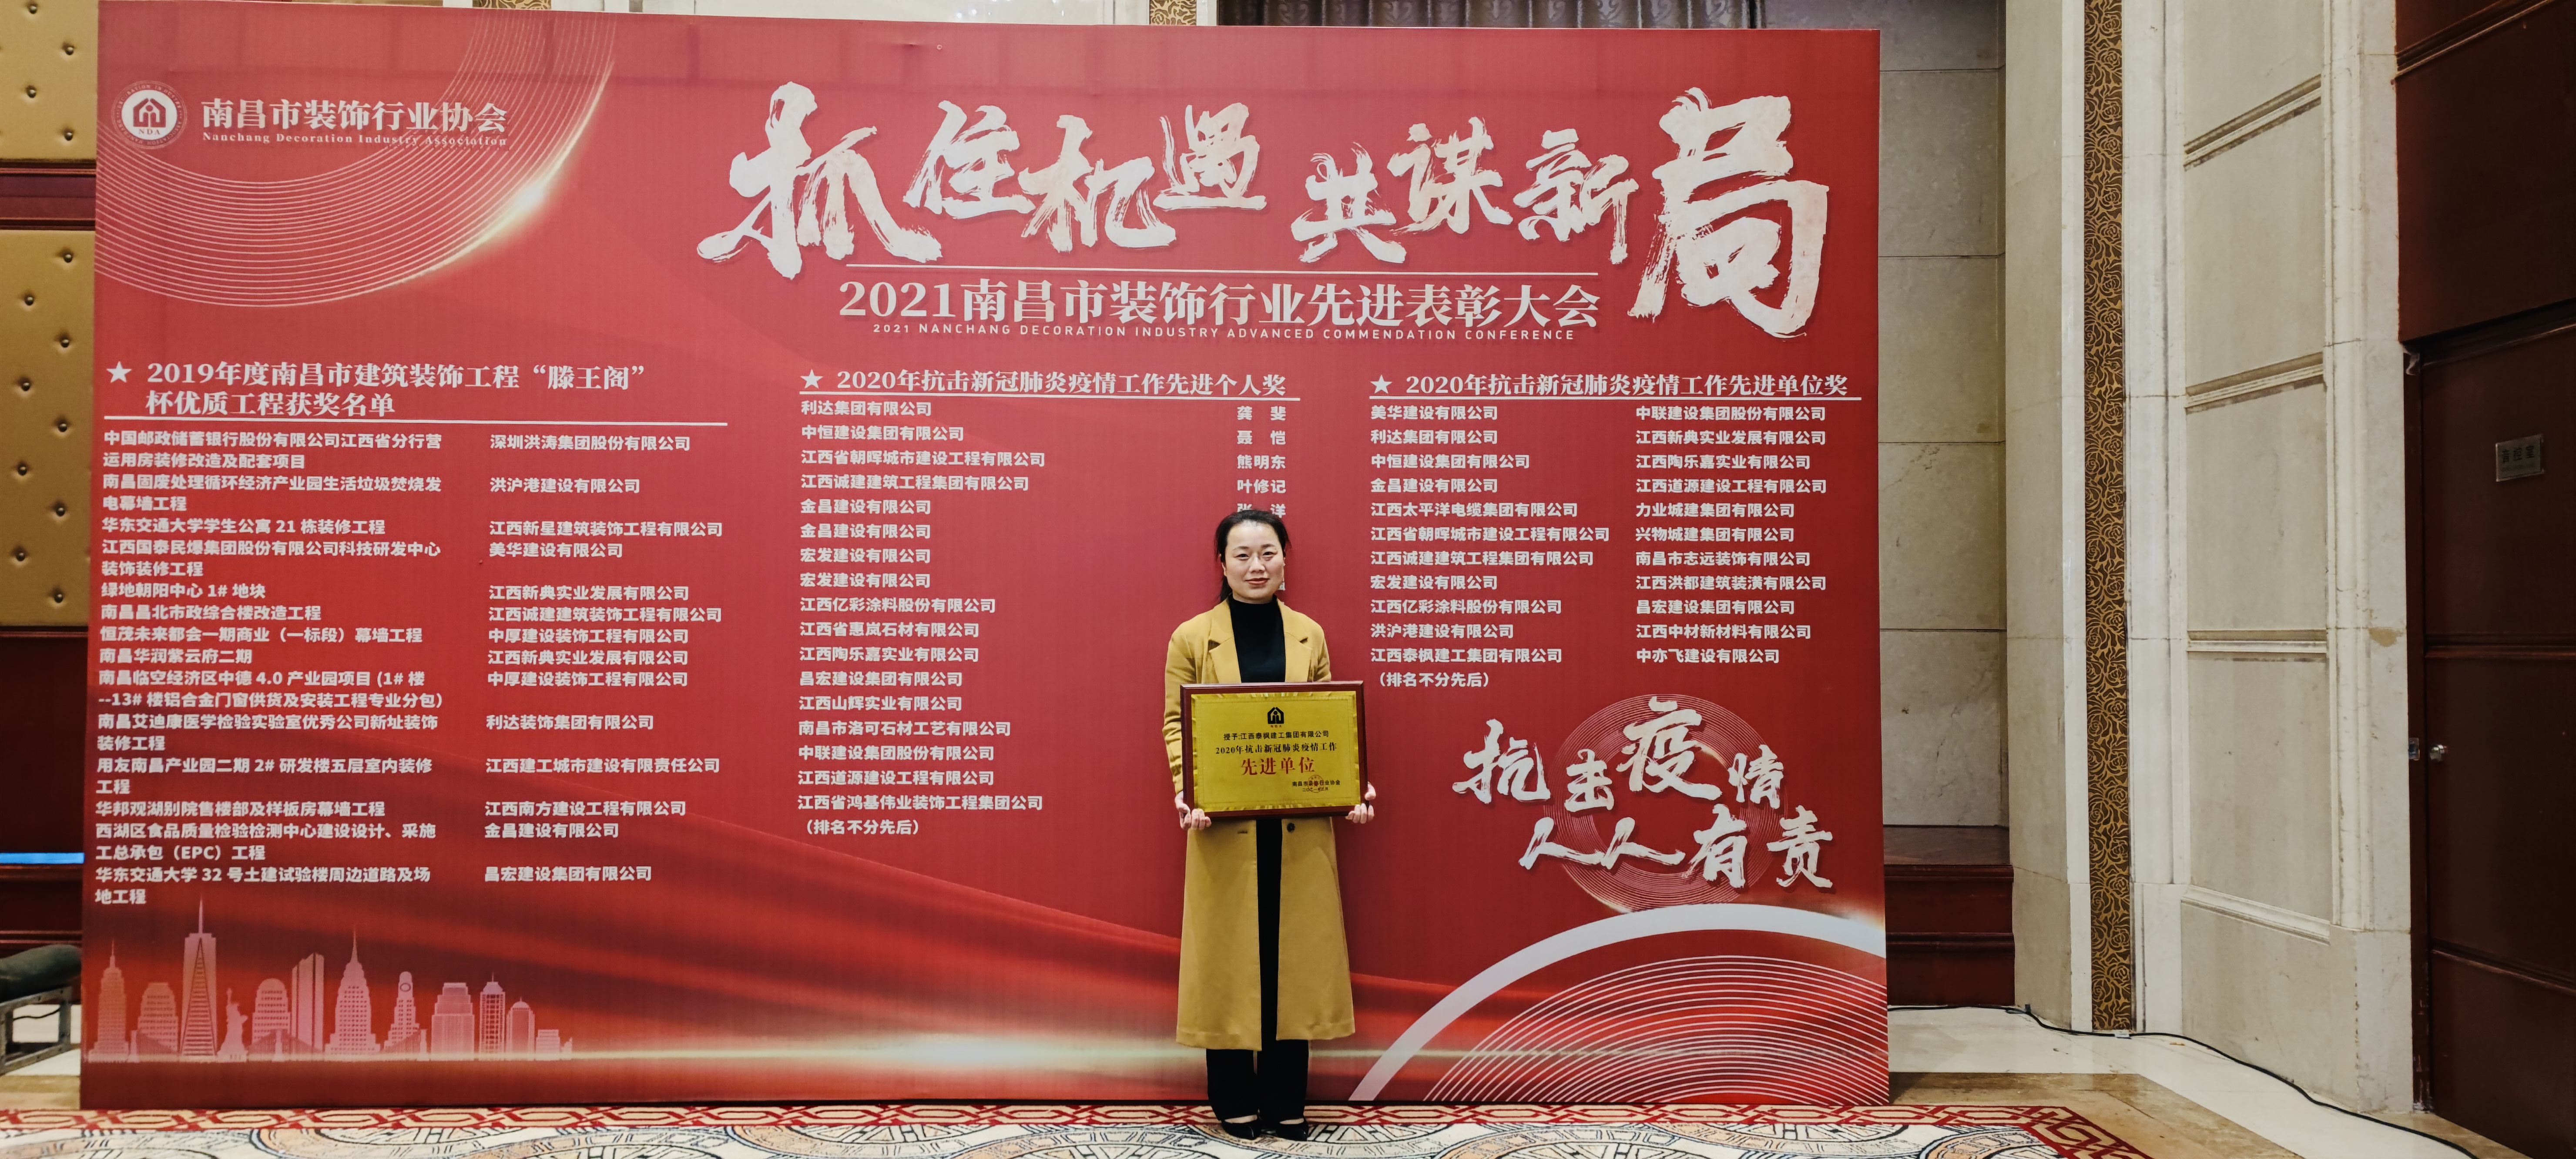 The group was awarded the advanced unit of Nanchang Decoration Industry Association in 2020 to fight the epidemic